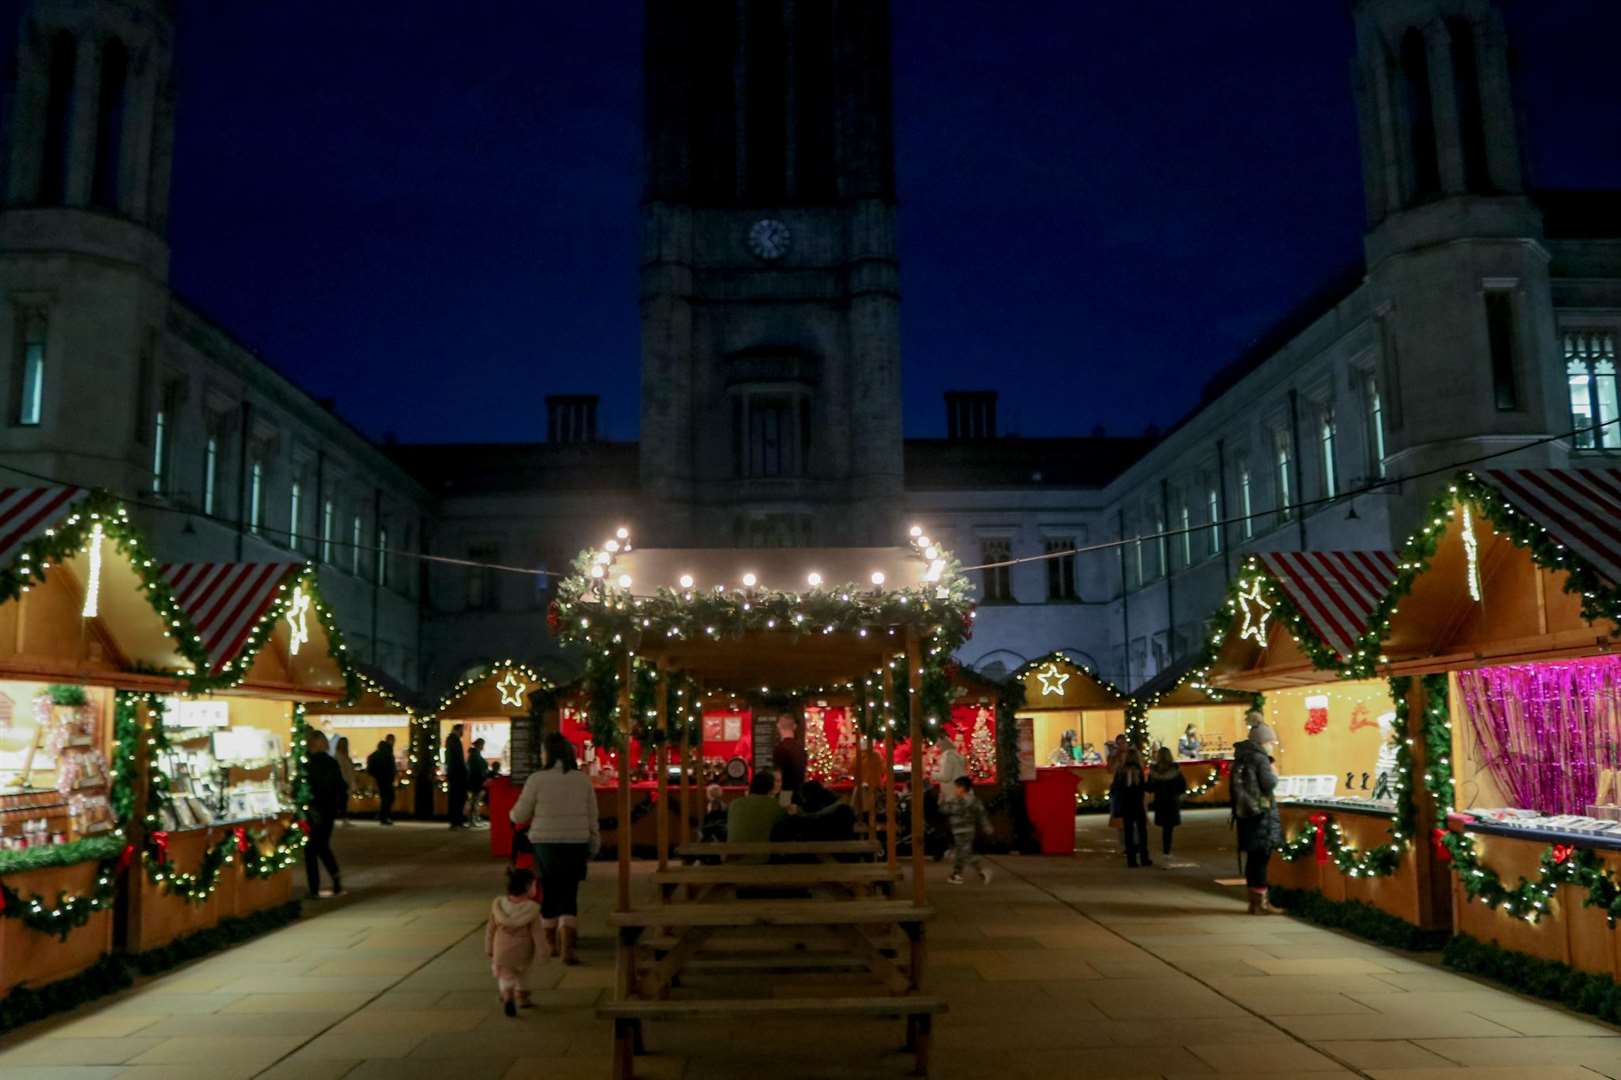 A call has been made for local producers to be part of Aberdeen’s glittering Christmas market - Curated in the Quad.